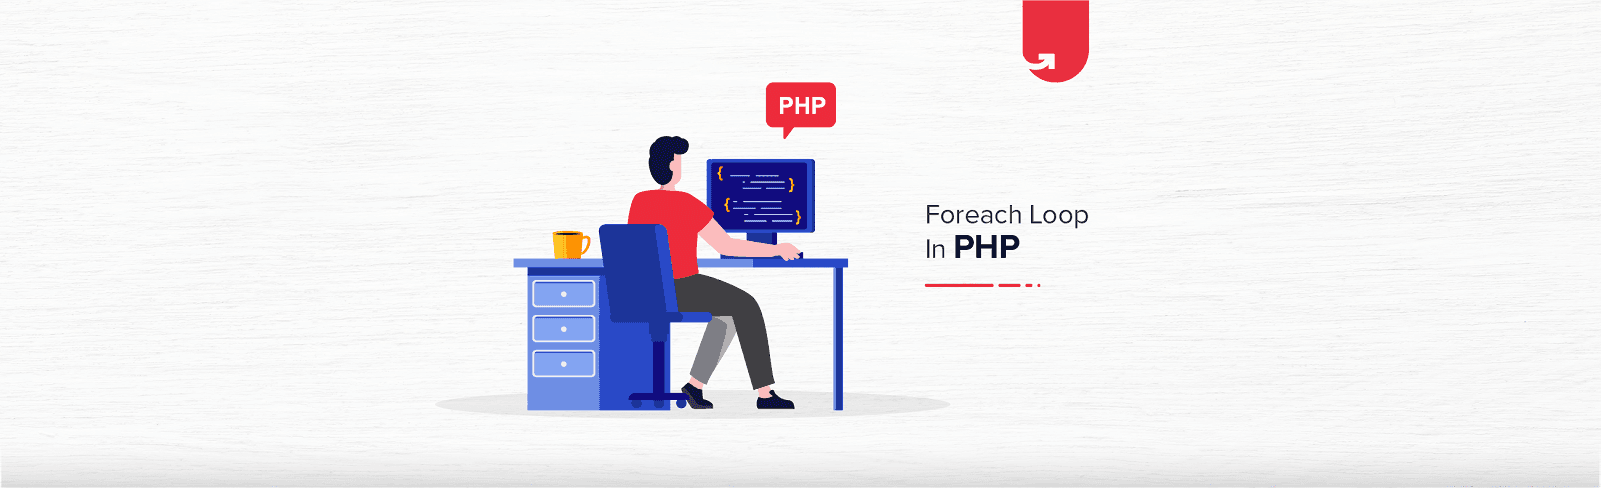 Foreach Loop In PHP: Definition, Functions &#038; Uses